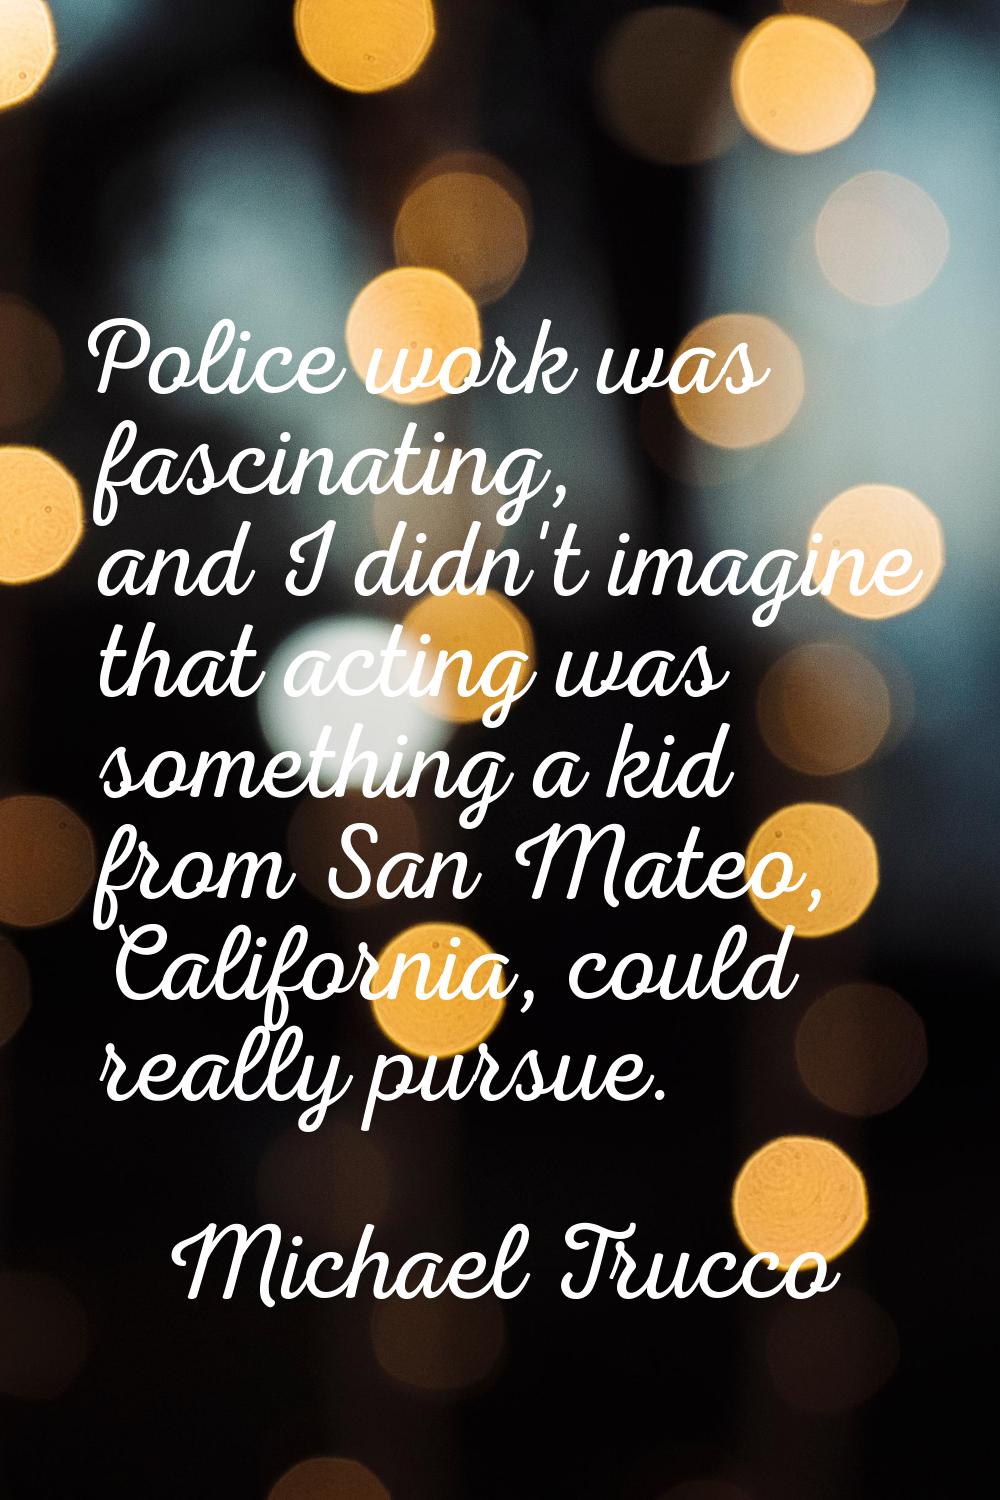 Police work was fascinating, and I didn't imagine that acting was something a kid from San Mateo, C